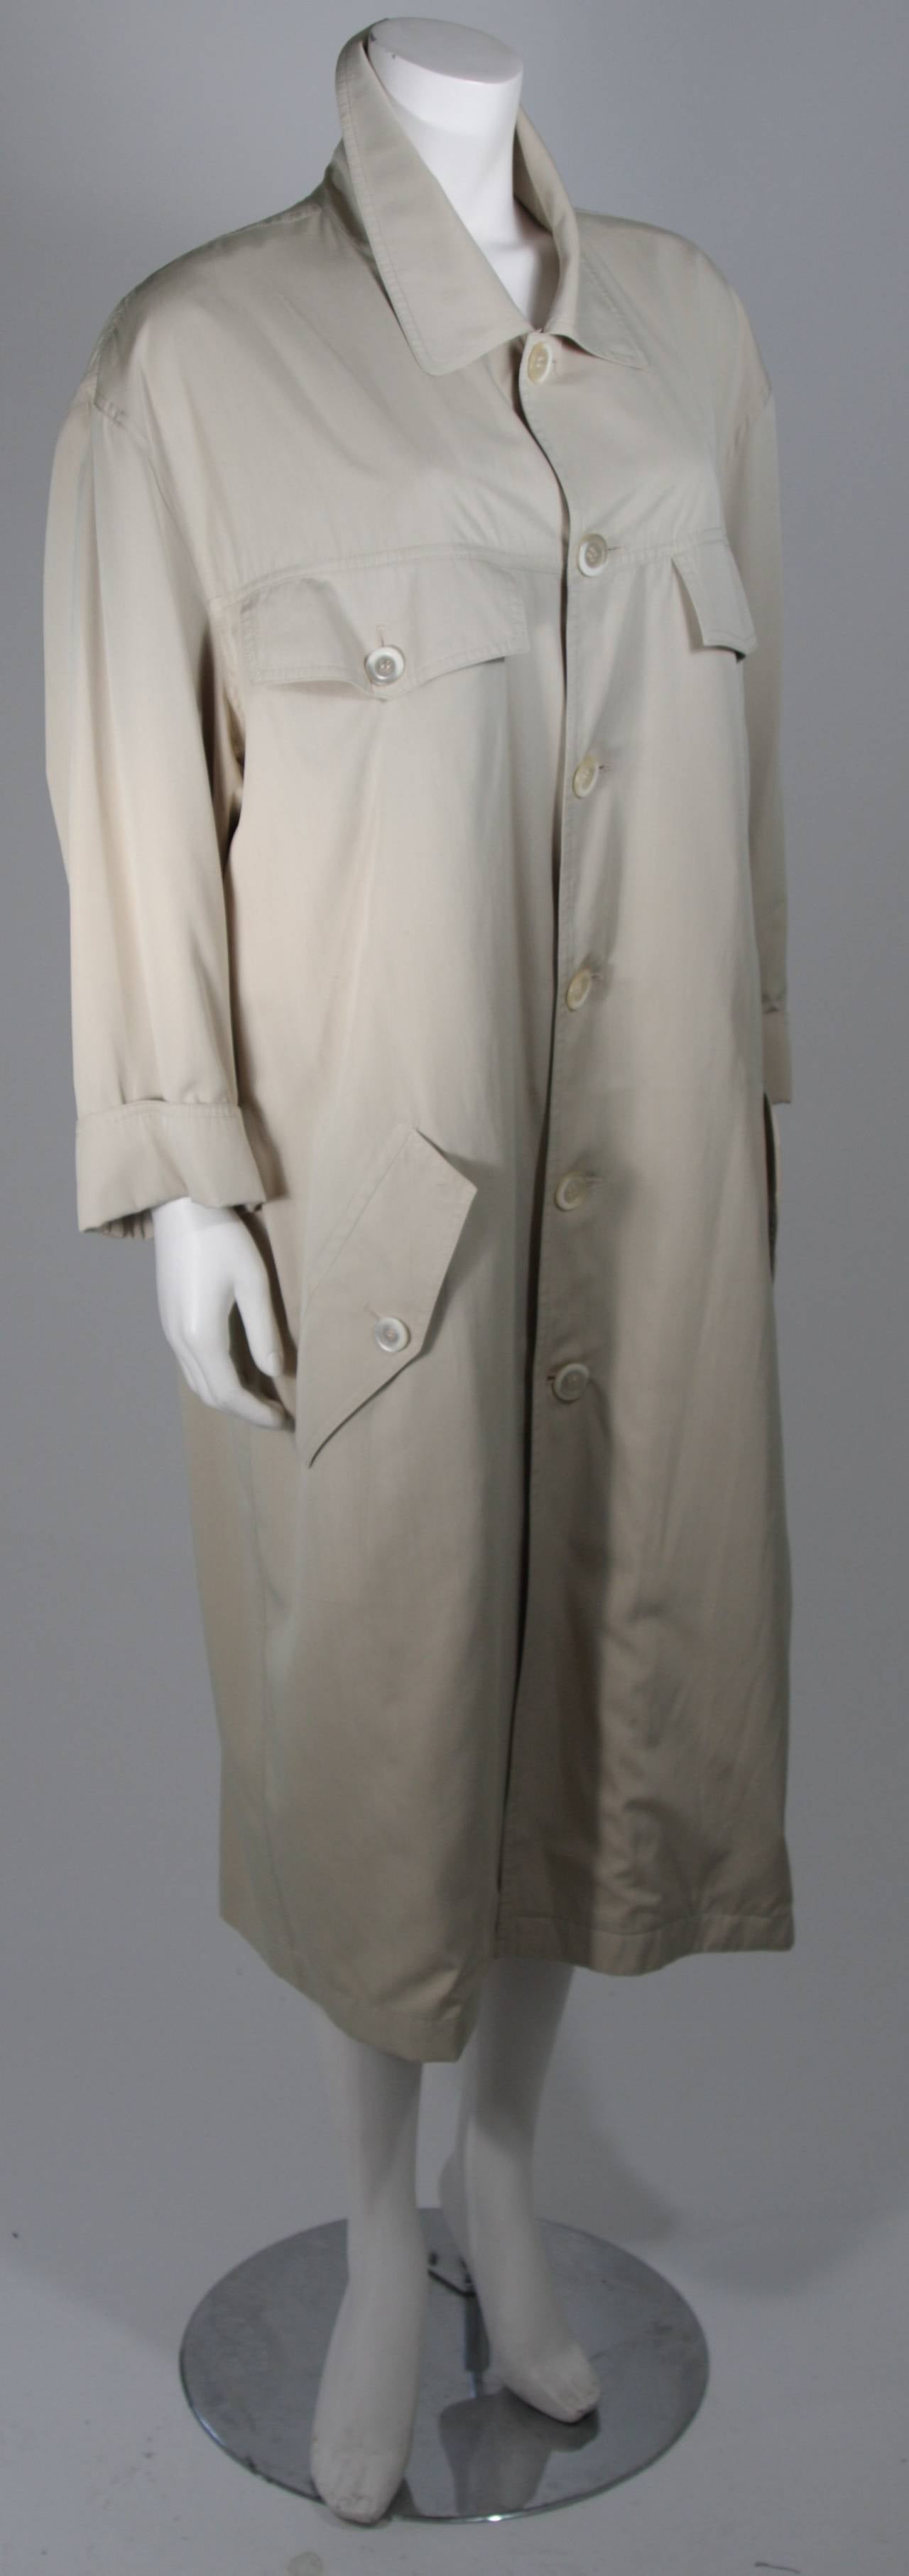 Pierre Balmain Oversized Khaki Coat In Excellent Condition For Sale In Los Angeles, CA